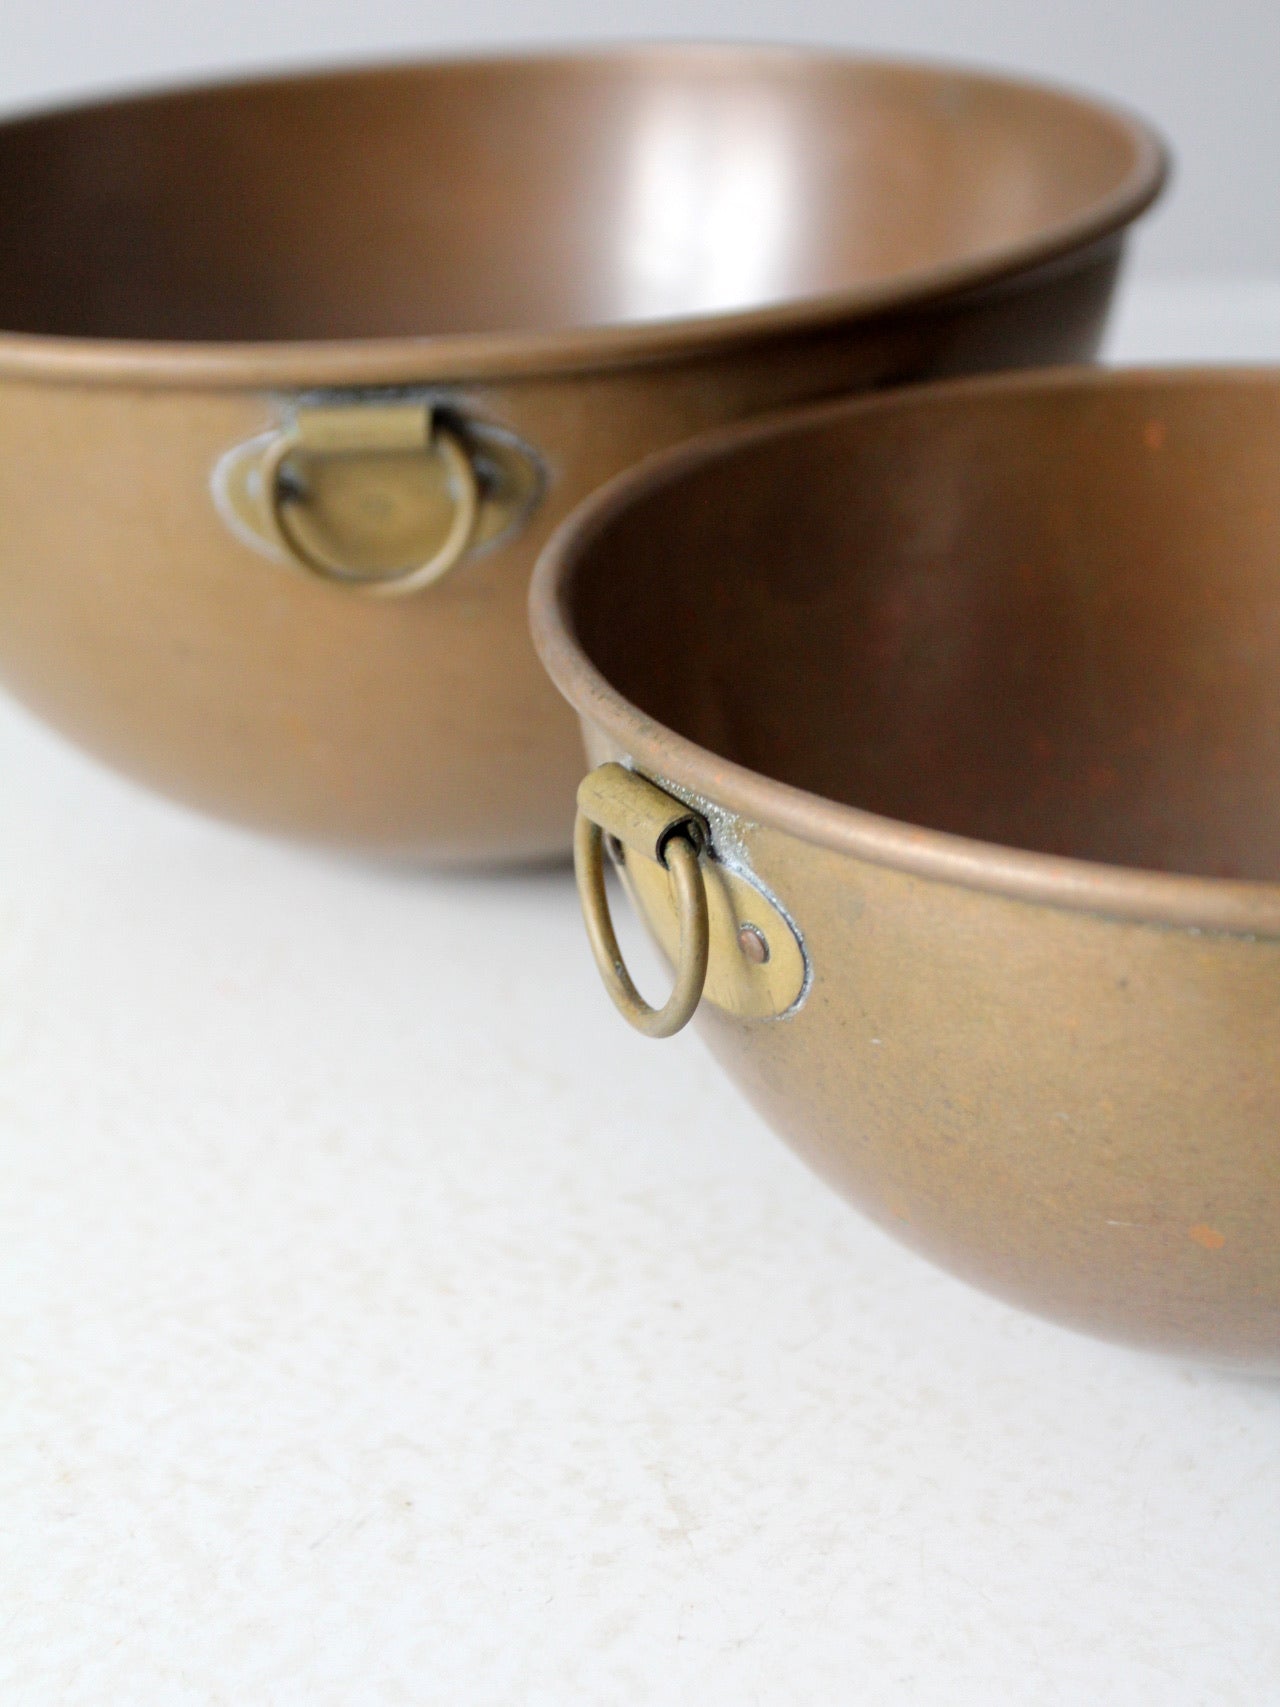 Vintage Set of 3 Copper Mixing Bowl Brass Ring Rounded Bottom Wall